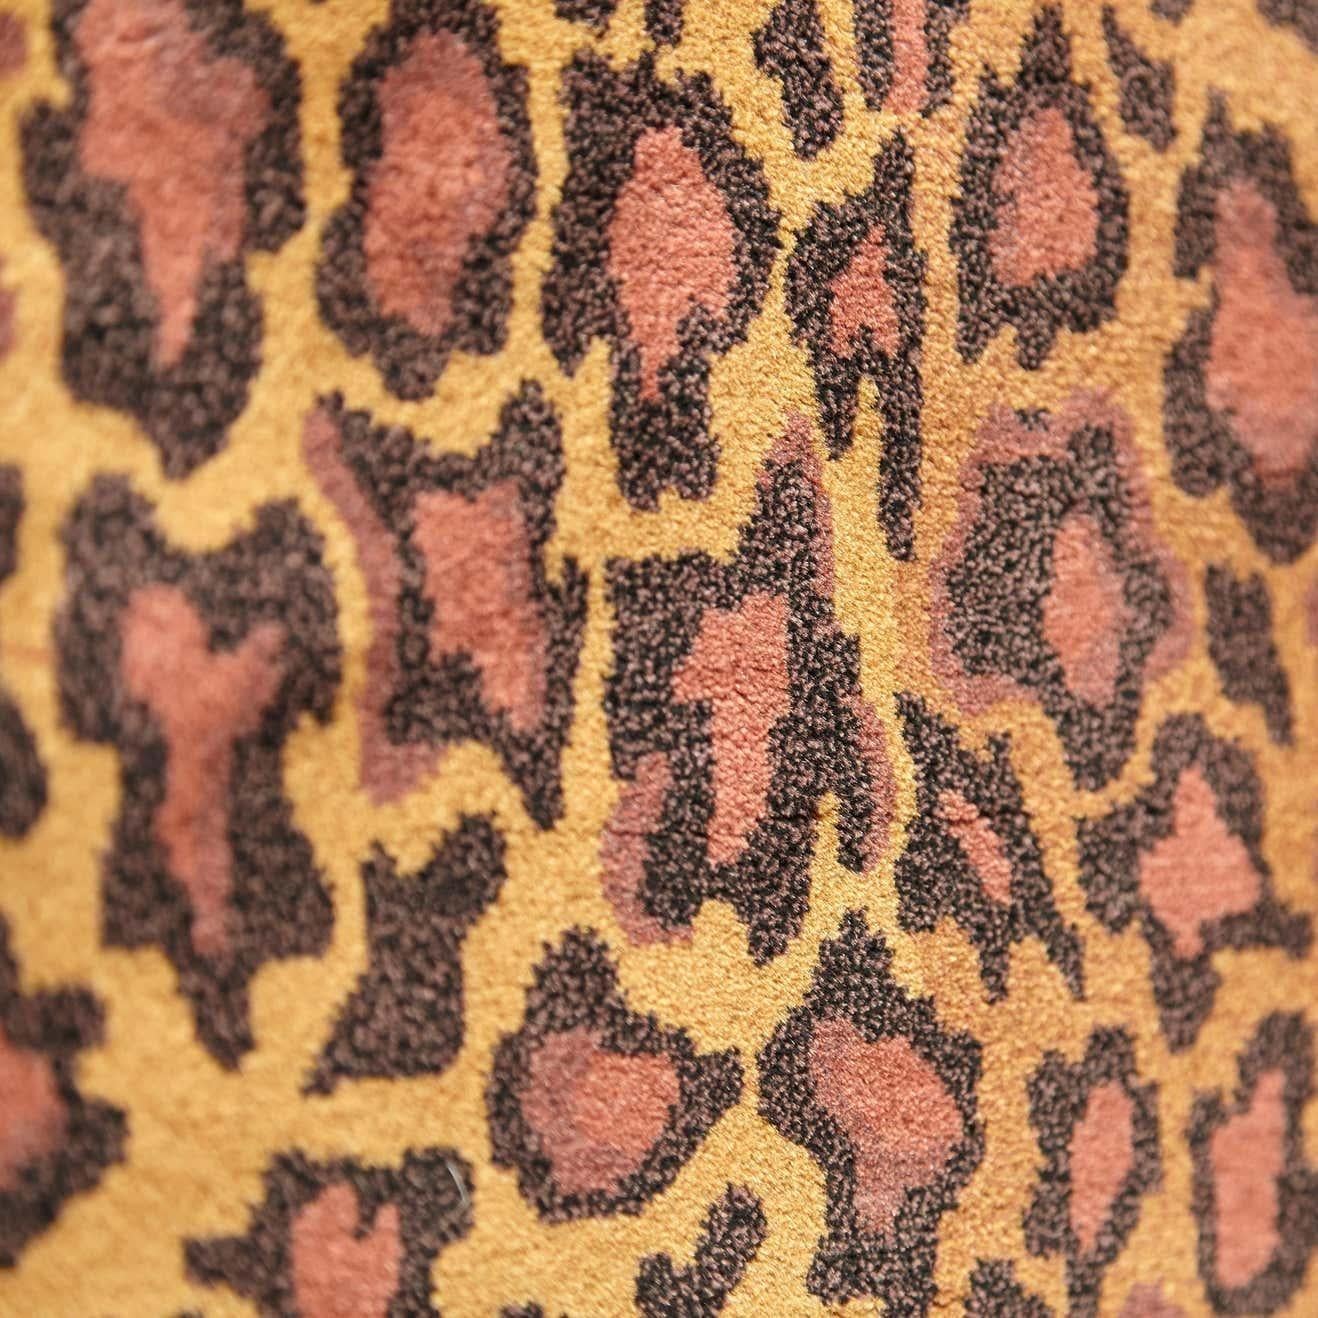 Late 20th Century Gianni Versace Collection Rug Wild Barocco, Gold Leopard Animal Print, 1980 For Sale